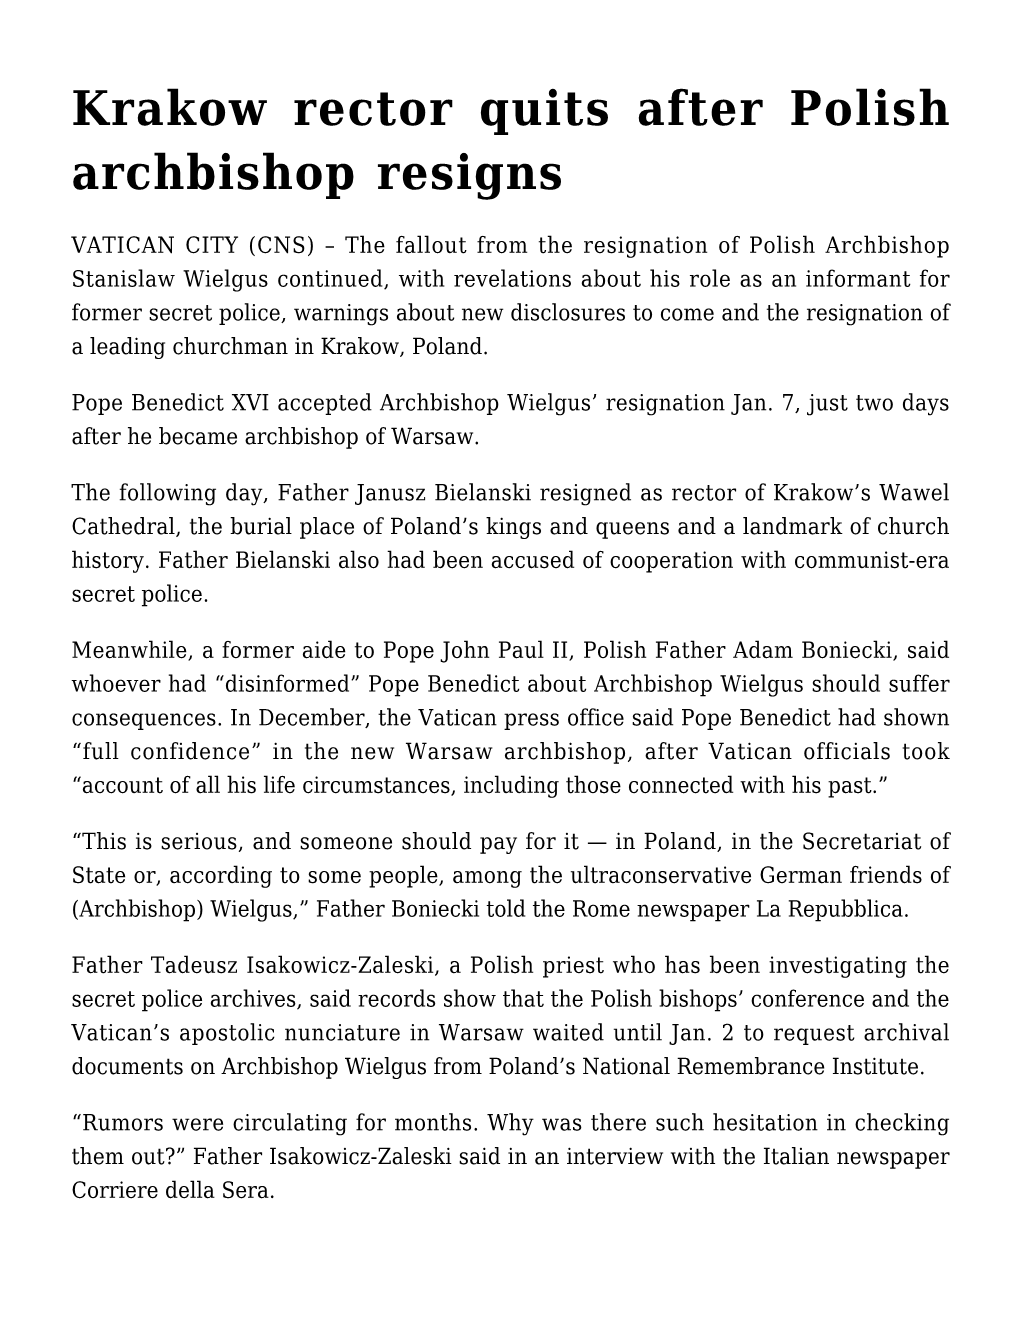 Krakow Rector Quits After Polish Archbishop Resigns